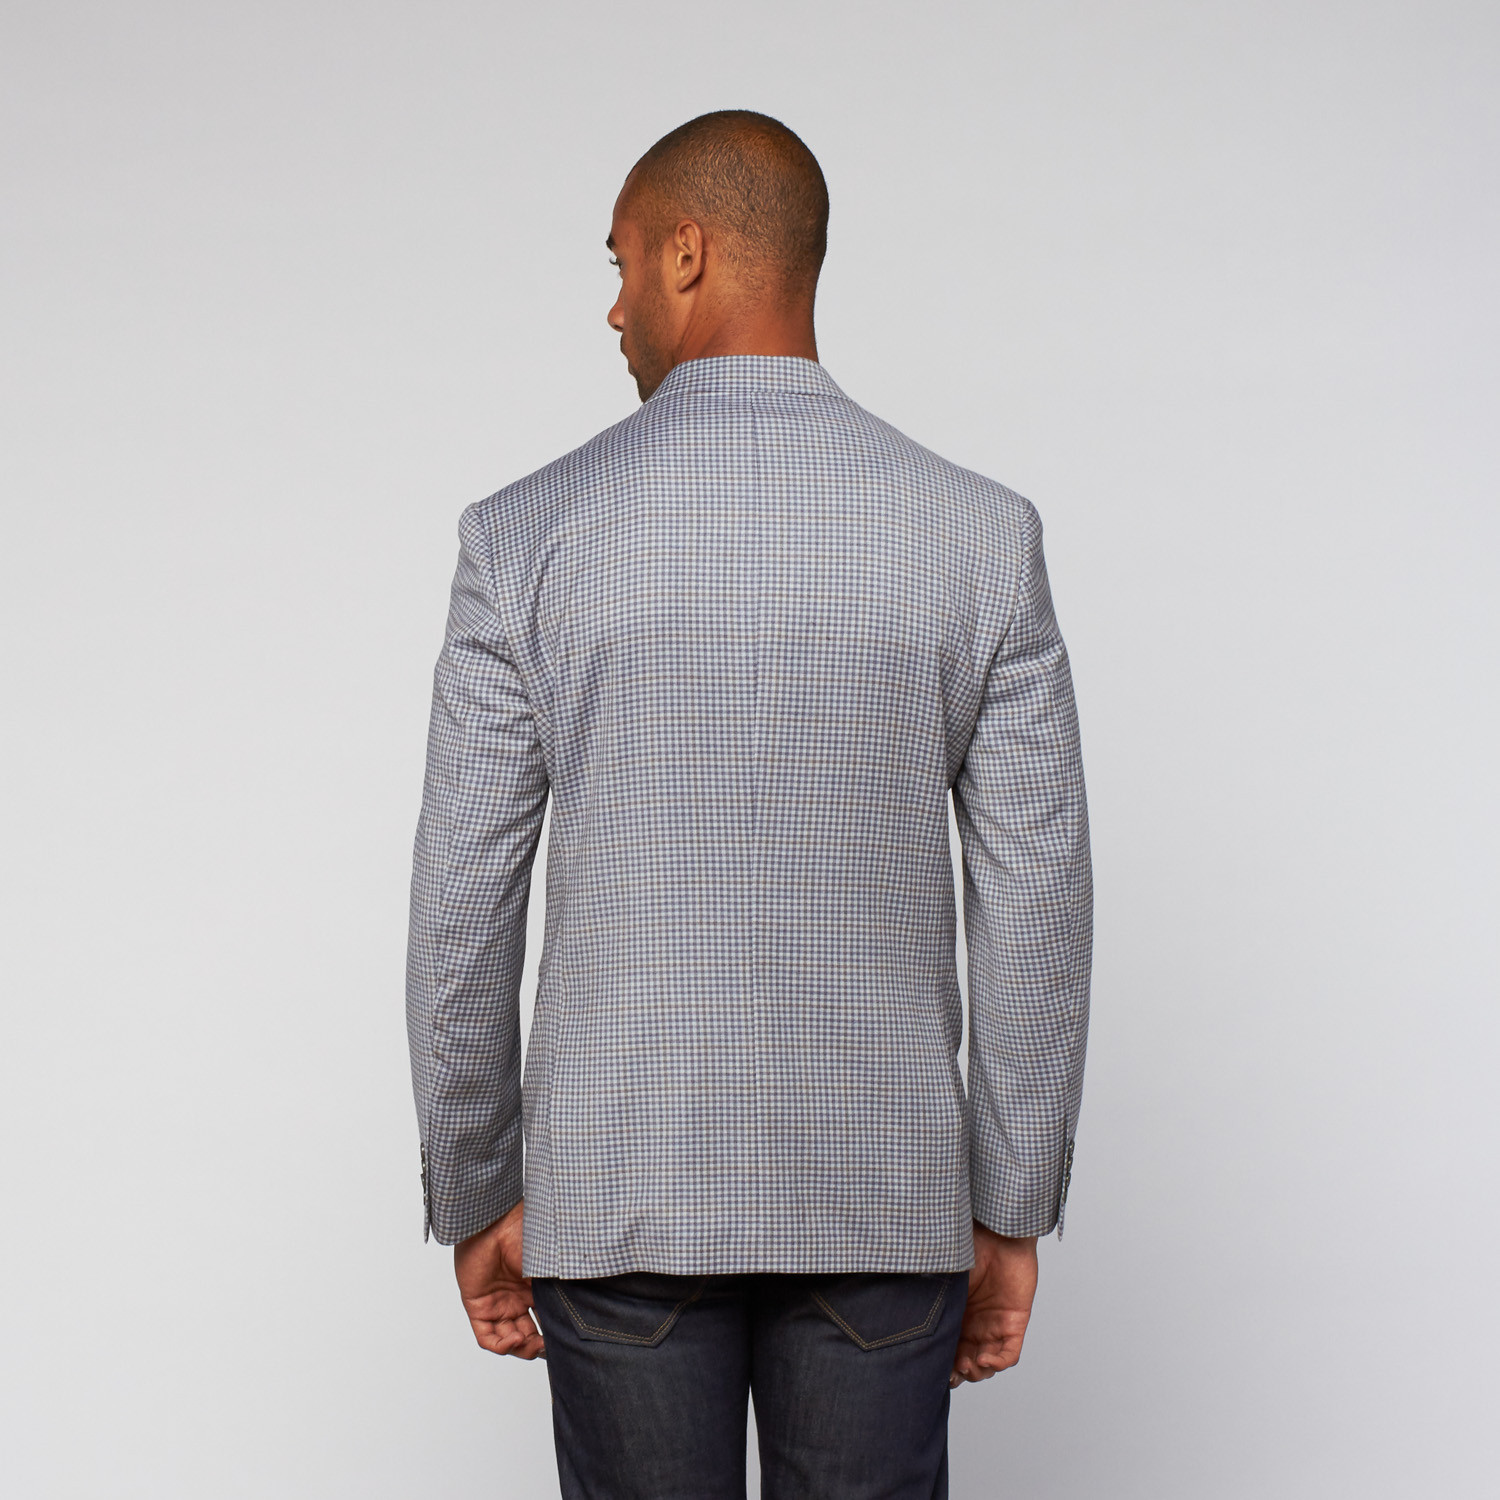 Tailored Wool Plaid Jacket // Light Blue (US: 52R) - Suiting Clearance